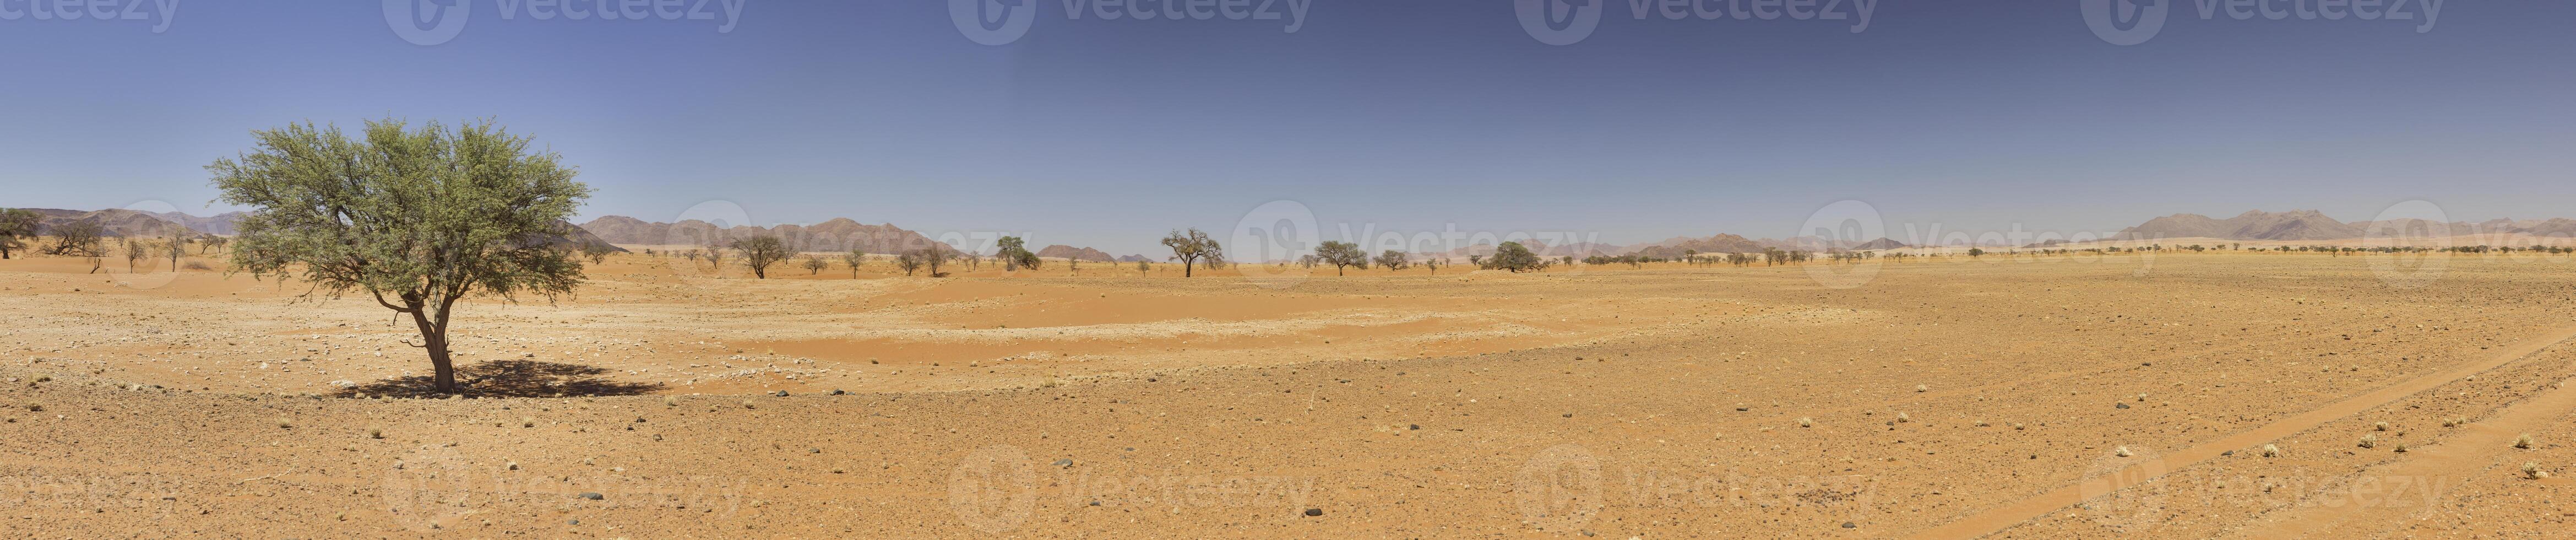 Panoramic picture of the red dunes of the Namib Desert in Namibia against a blue sky in the evening light photo